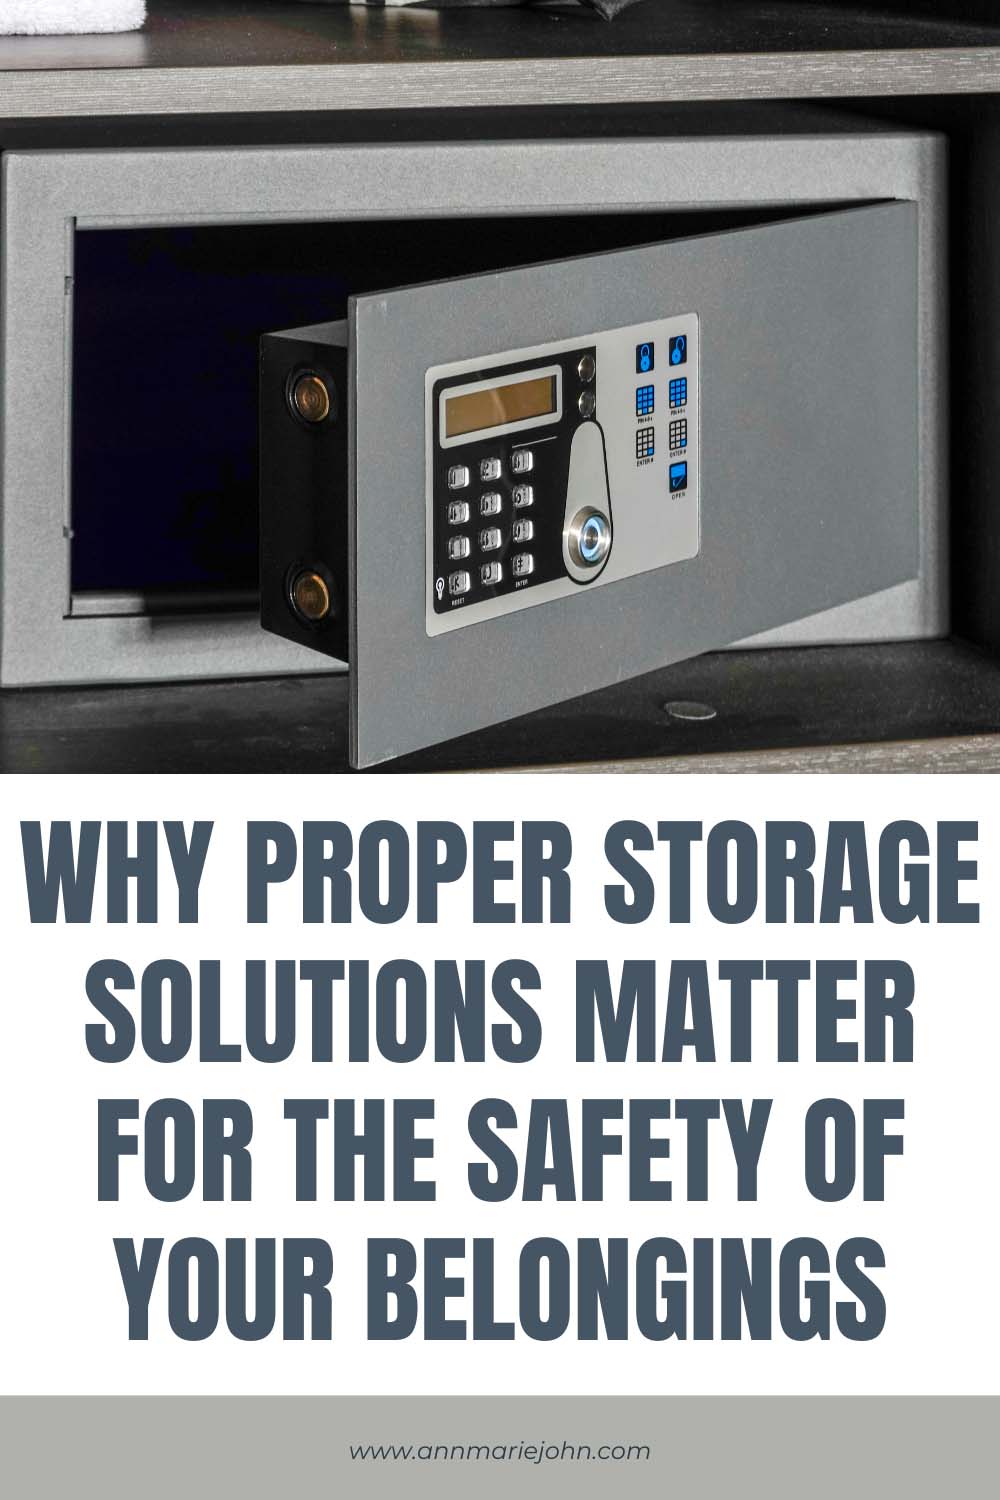 Why Proper Storage Solutions Matter for the Safety of Your Belongings